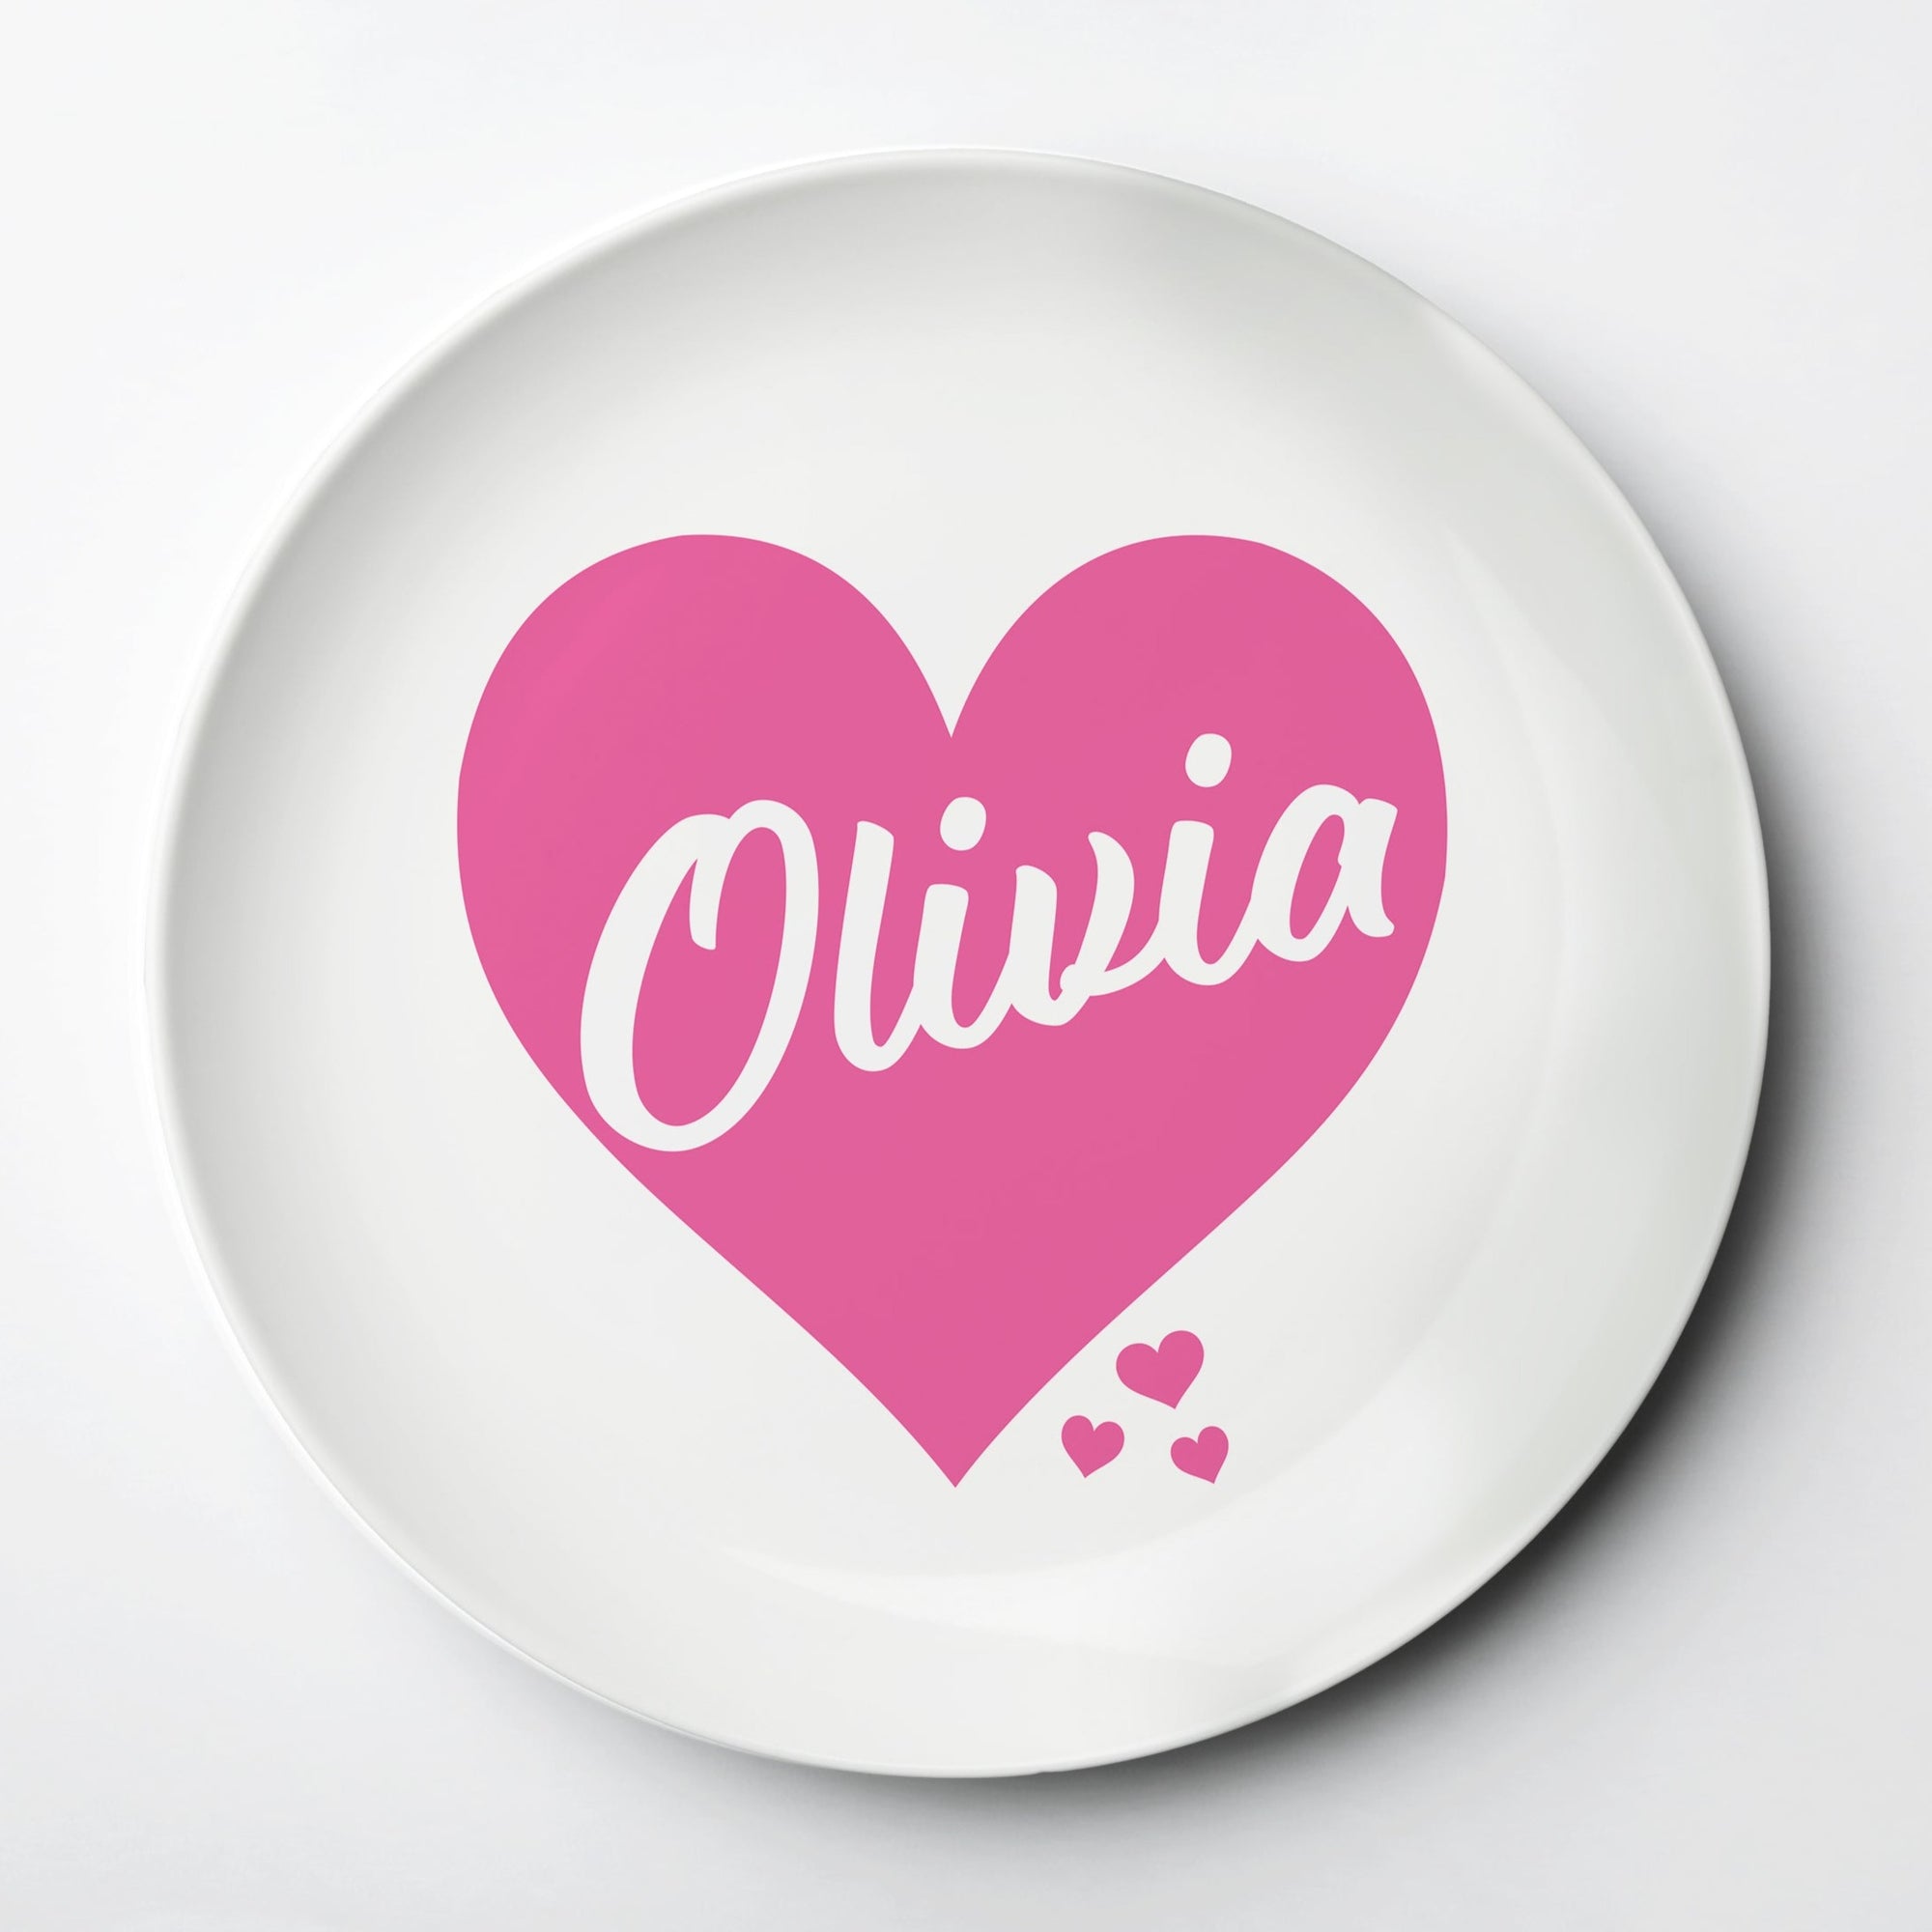 Valentine's Day or Everyday personalized ThermoSāf® kids reusable plate, microwave, dishwasher and oven safe.  Made in the USA, Pipsy.com